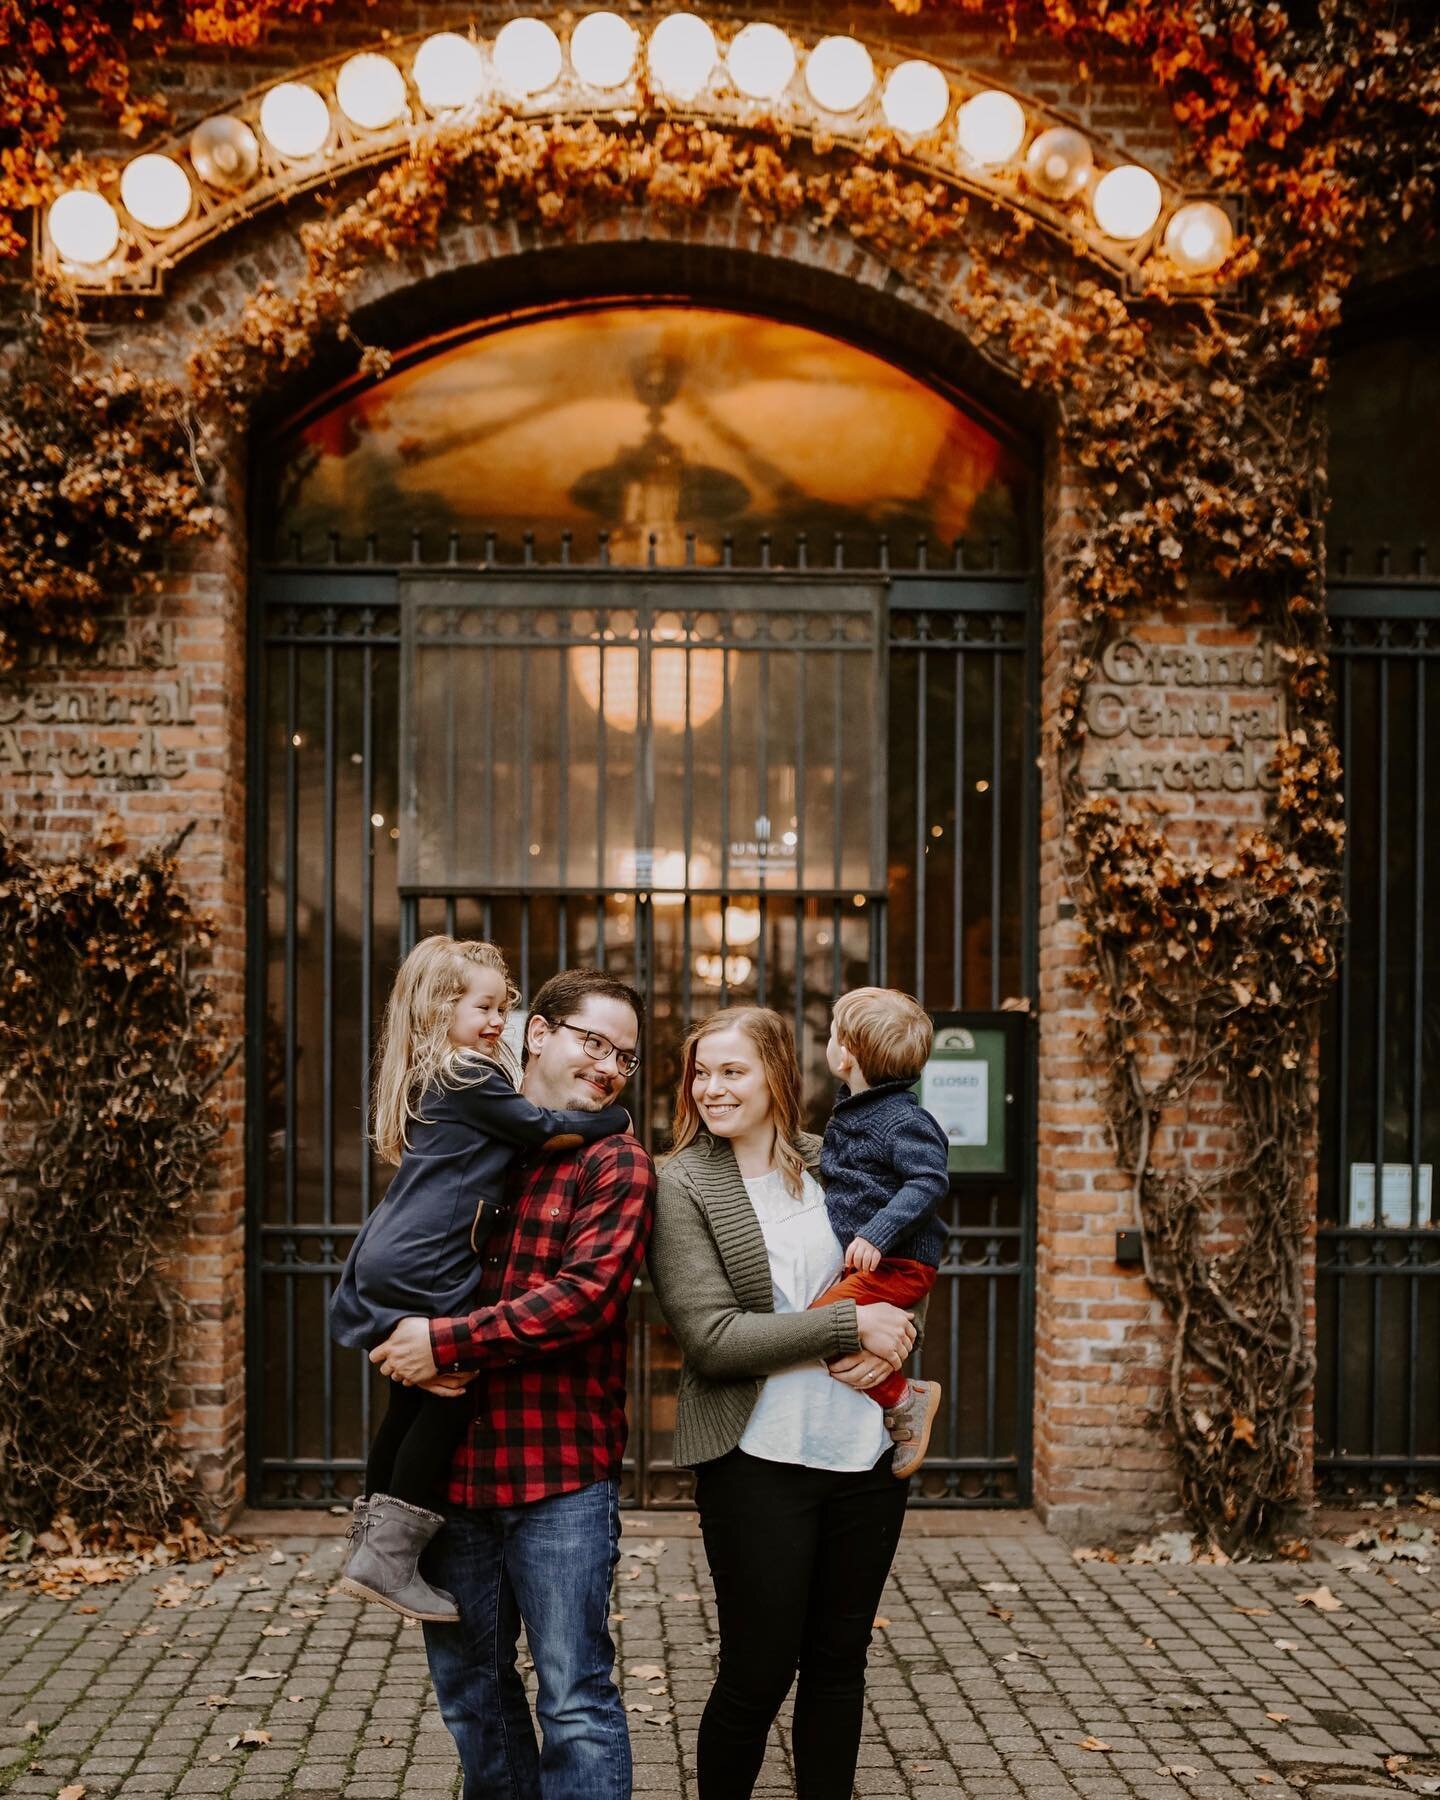 Giveaway time!
I will be giving away one free family session! All you have to do is follow me, like this post, tag 3 friends in the comments! Post to your story for an extra bonus entry 💕 go go go! Shoot must be used within one year and does not cov